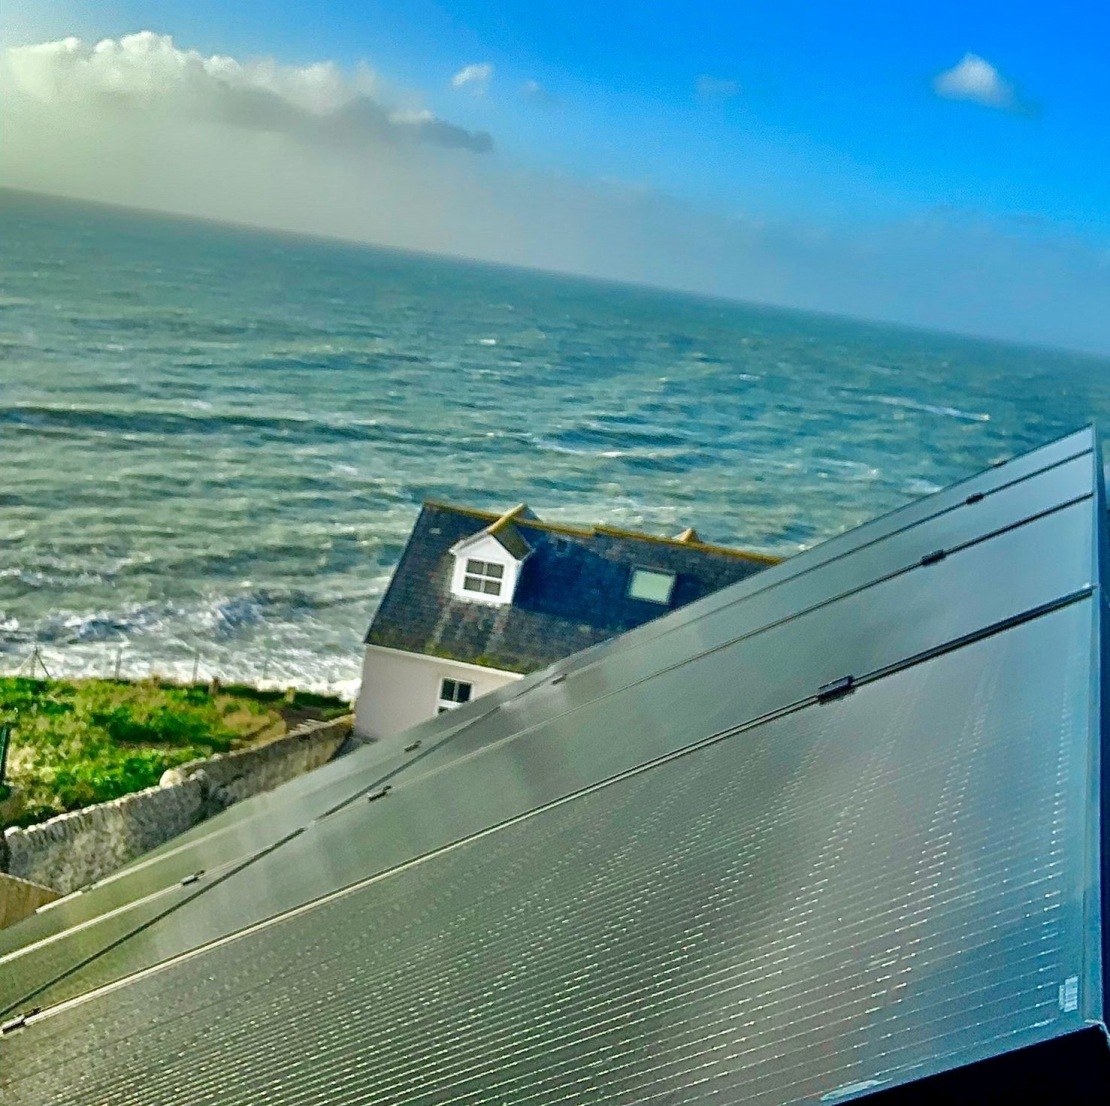 Solar panels on roof of detached home overlooking the sea